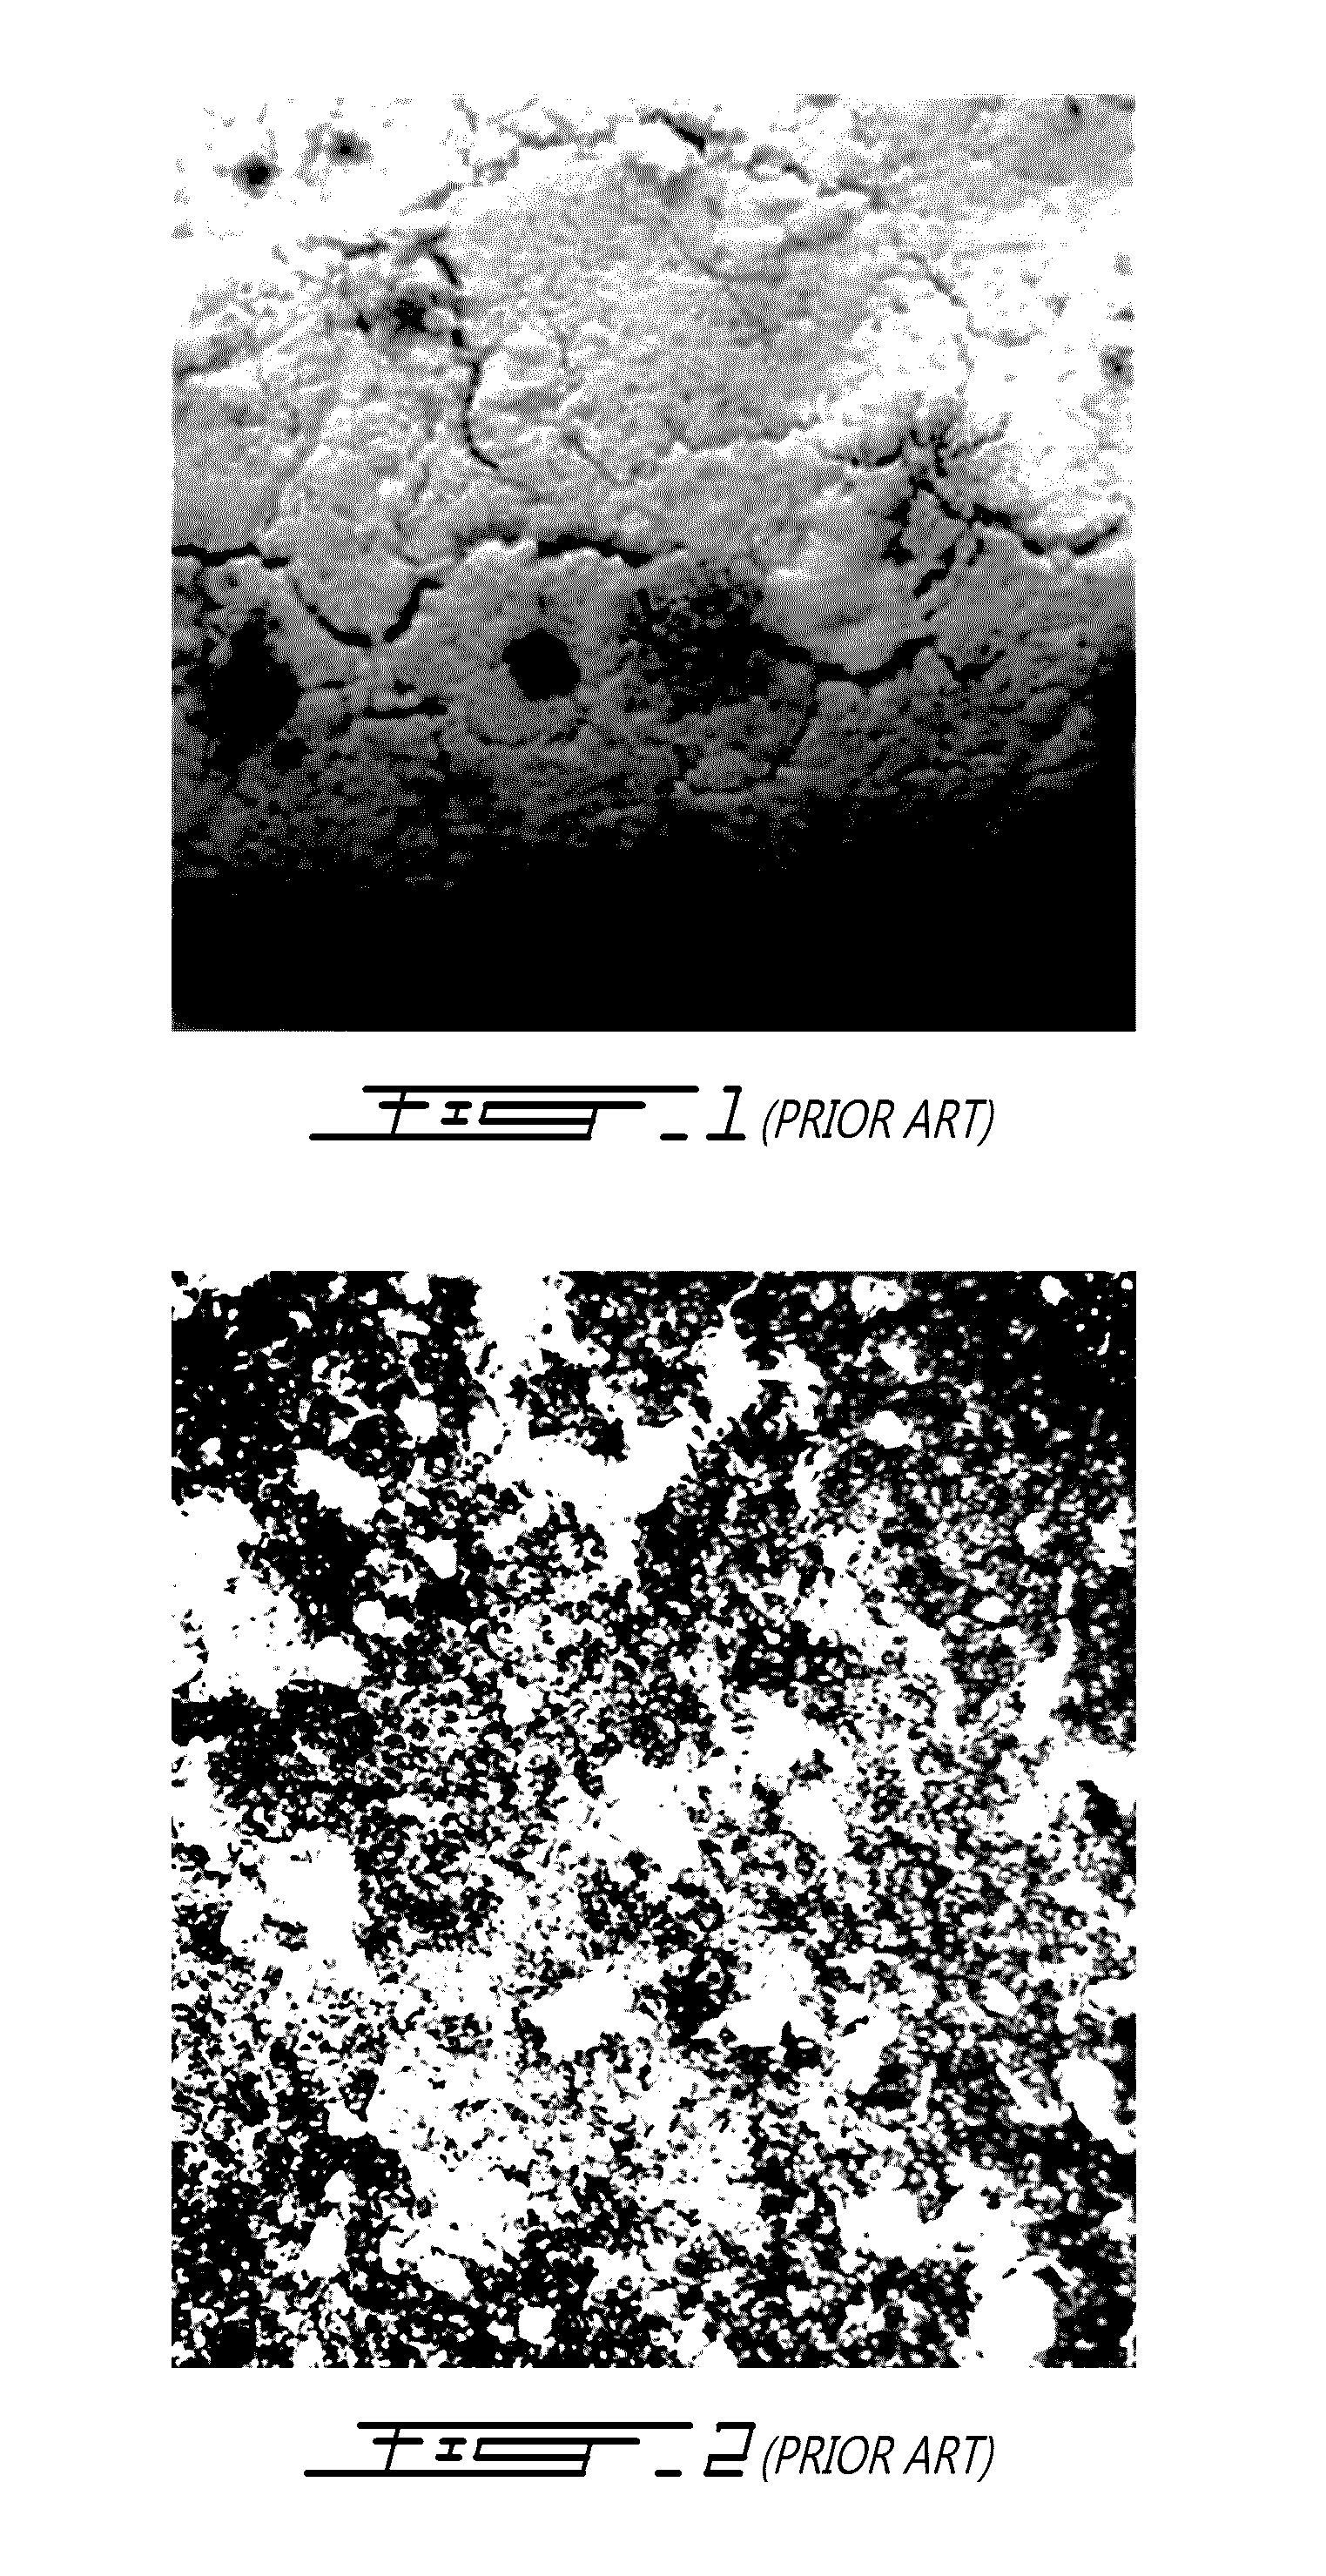 Dry mixed re-dispersible cellulose filament/carrier product and the method of making the same